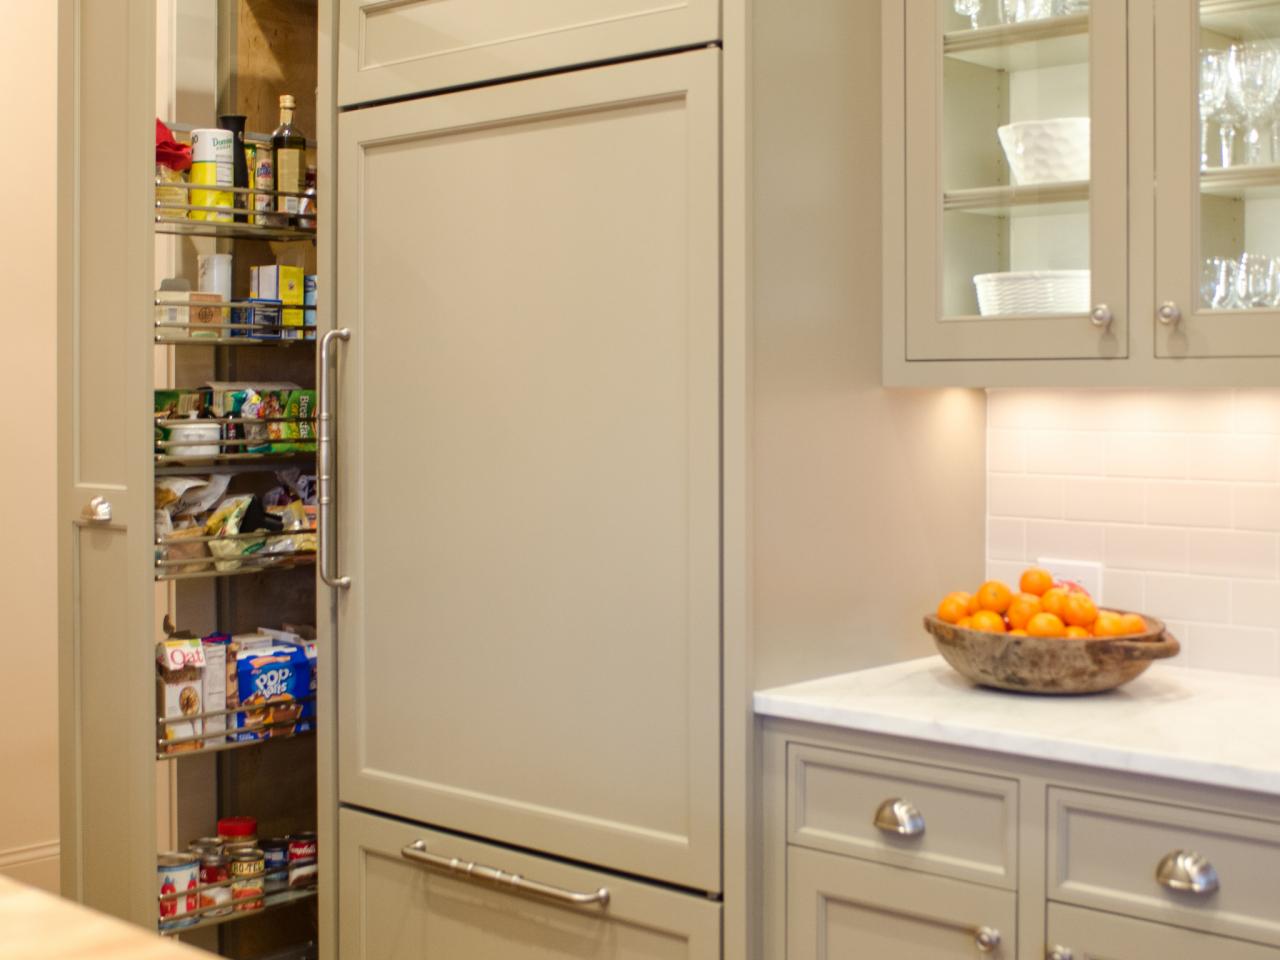 Pantry Cabinet Plans Pictures Options, How To Build A Corner Kitchen Pantry Cabinet